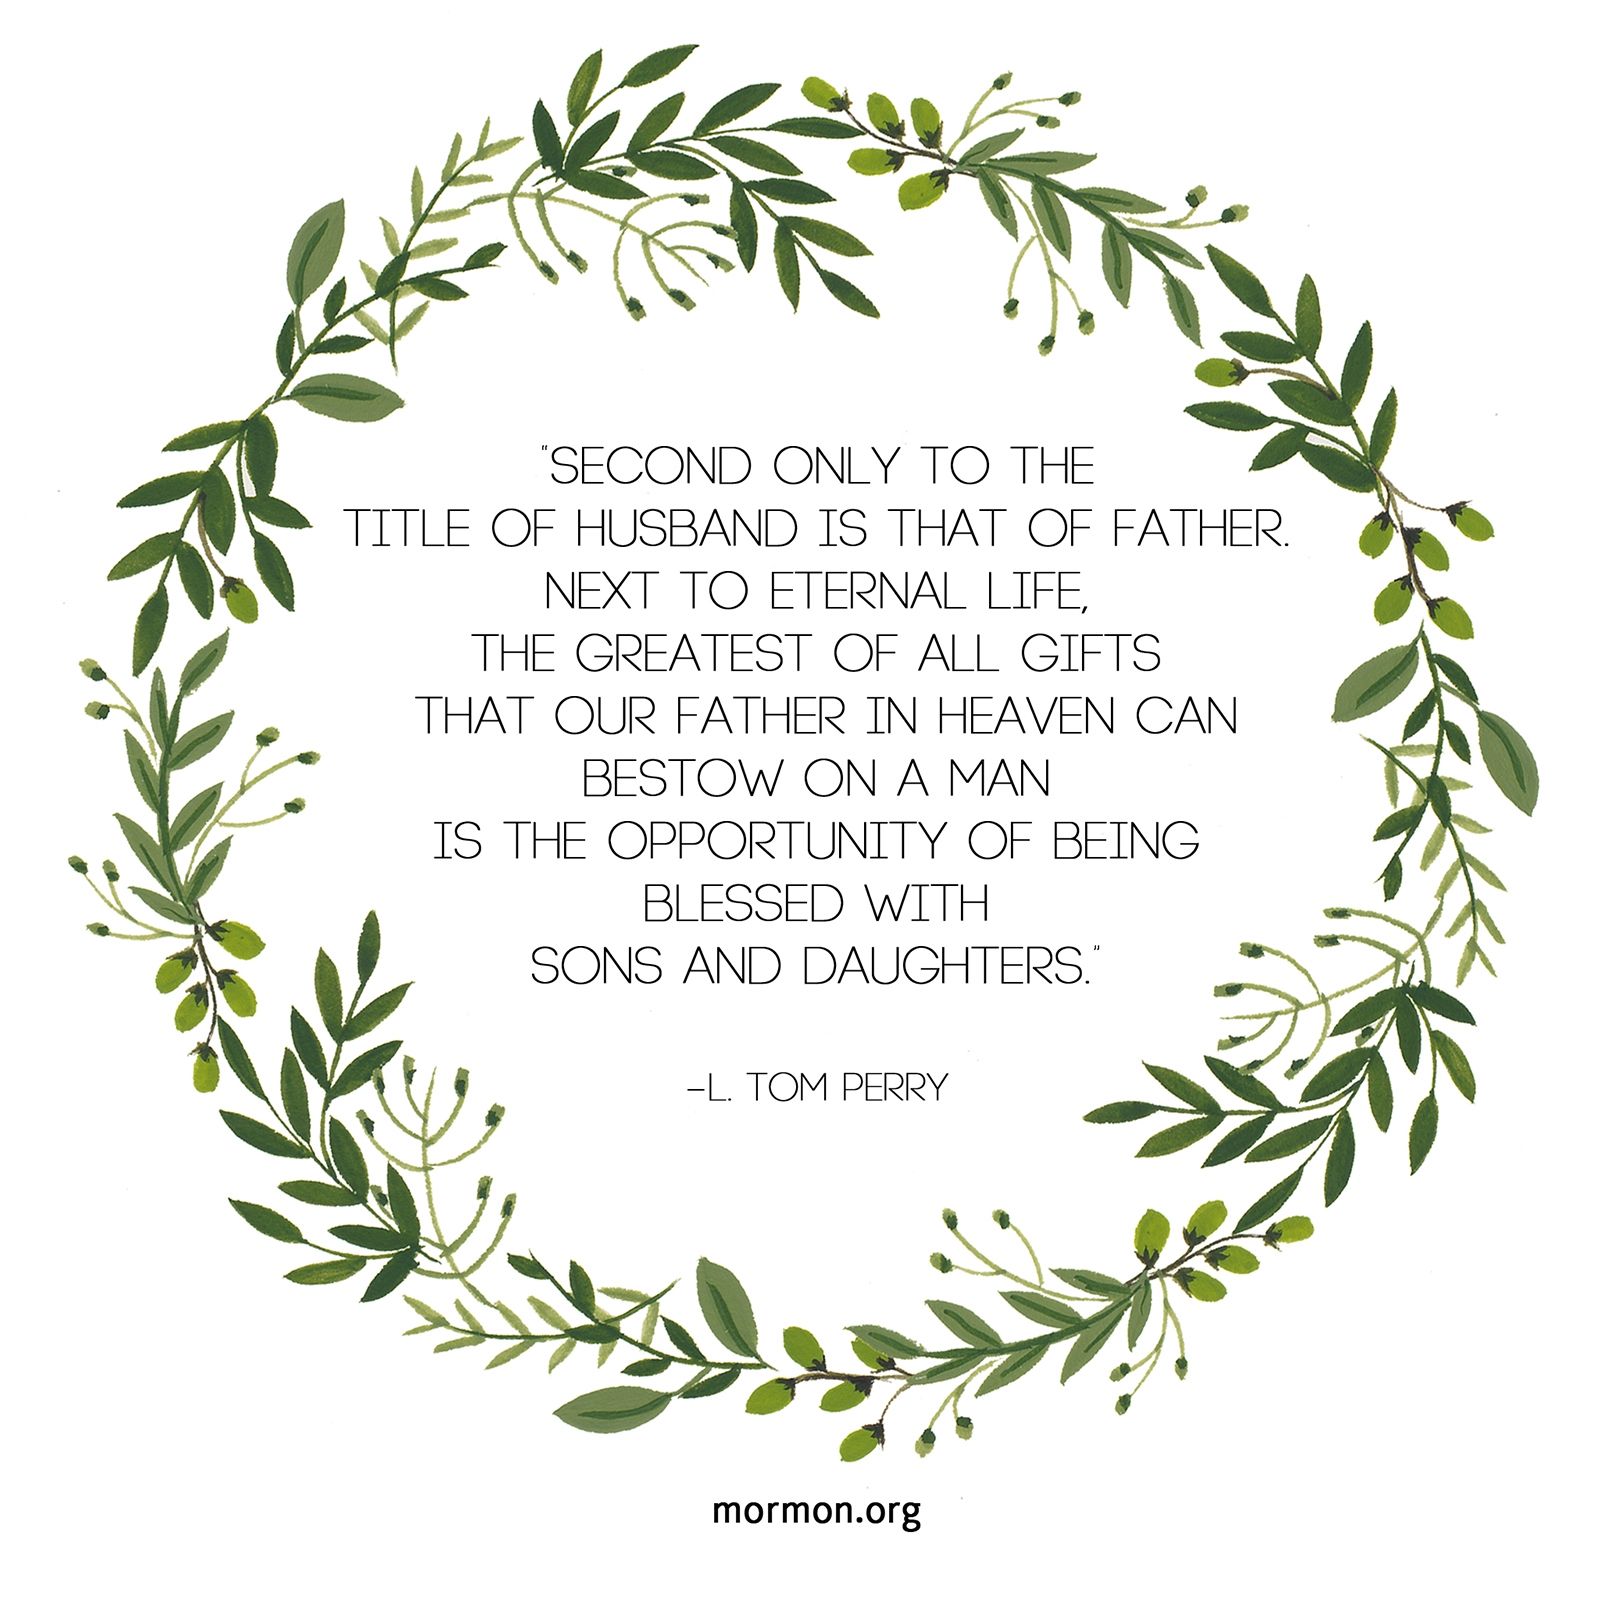 “Second only to the title of husband is that of father. Next to eternal life, the greatest of all gifts that our Father in heaven can bestow on a man is the opportunity of being blessed with sons and daughters.”—Elder L. Tom Perry, “Father—Your Role, Your Responsibility”